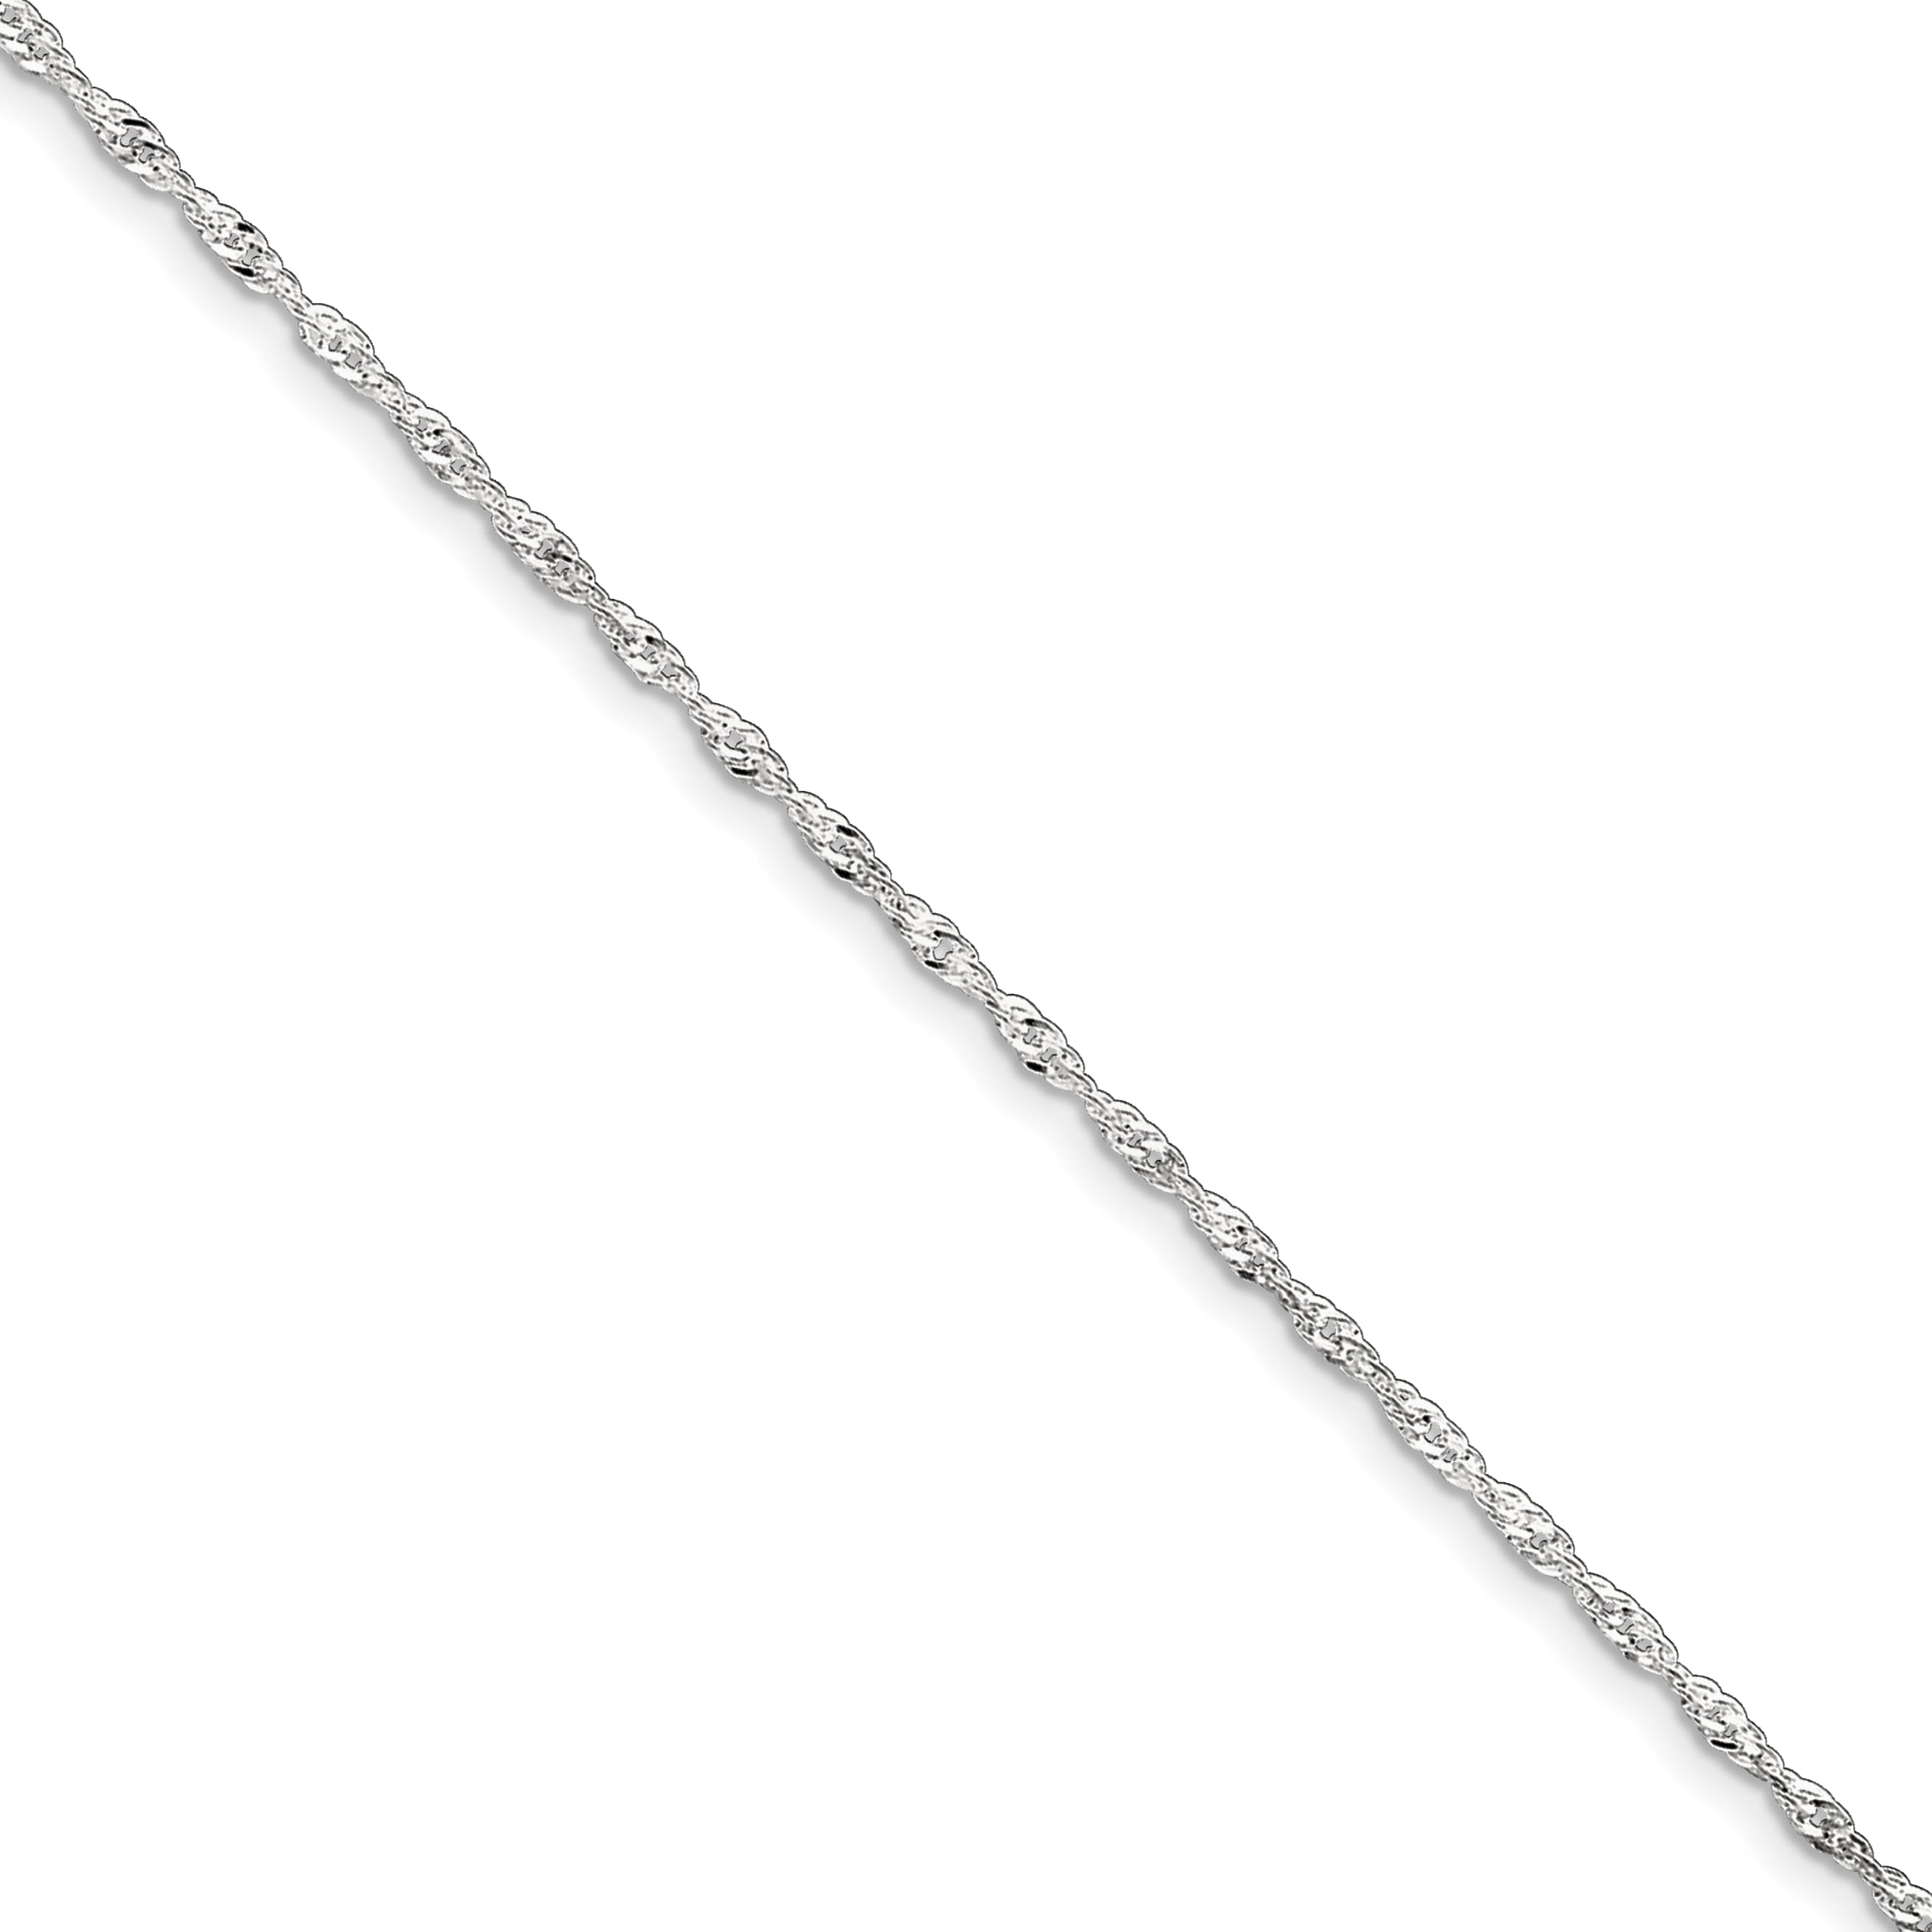 Singapore Chain Necklace 925 Sterling Silver Necklace Jewellery Gift